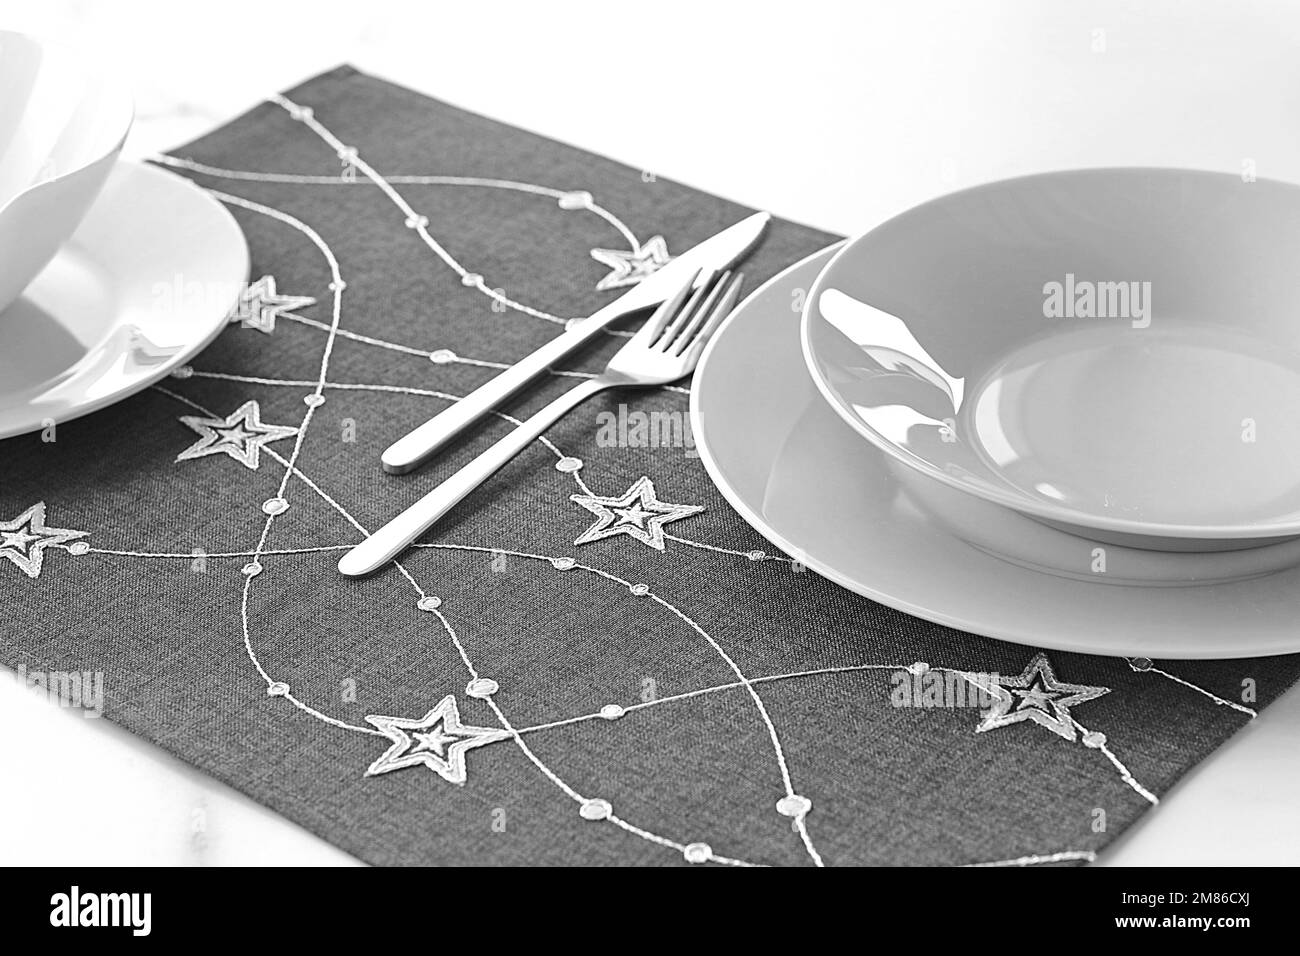 Table runner, napkin or kitchen placemat on cloth isolated or with plate, cutlery and glasses Stock Photo